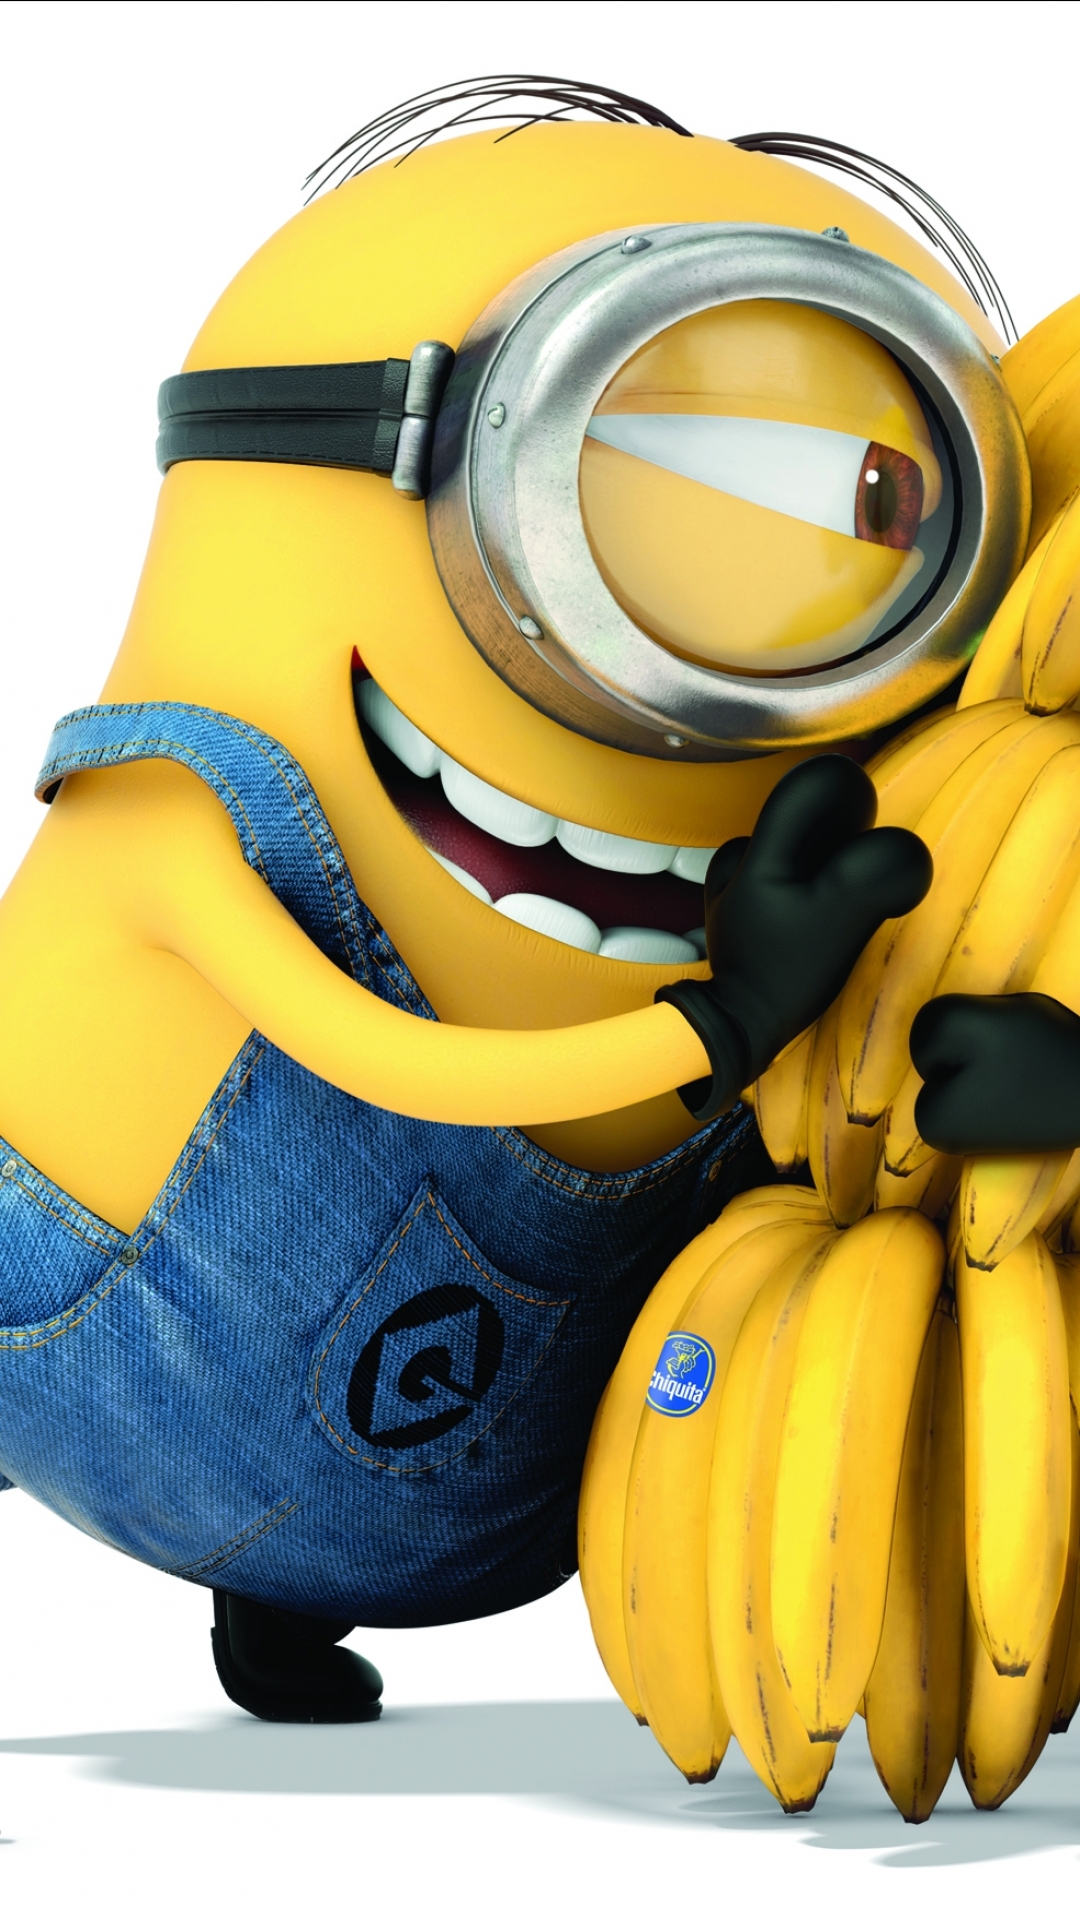 Best Minions Wallpapers For Iphone 6s+ - HD Wallpaper 